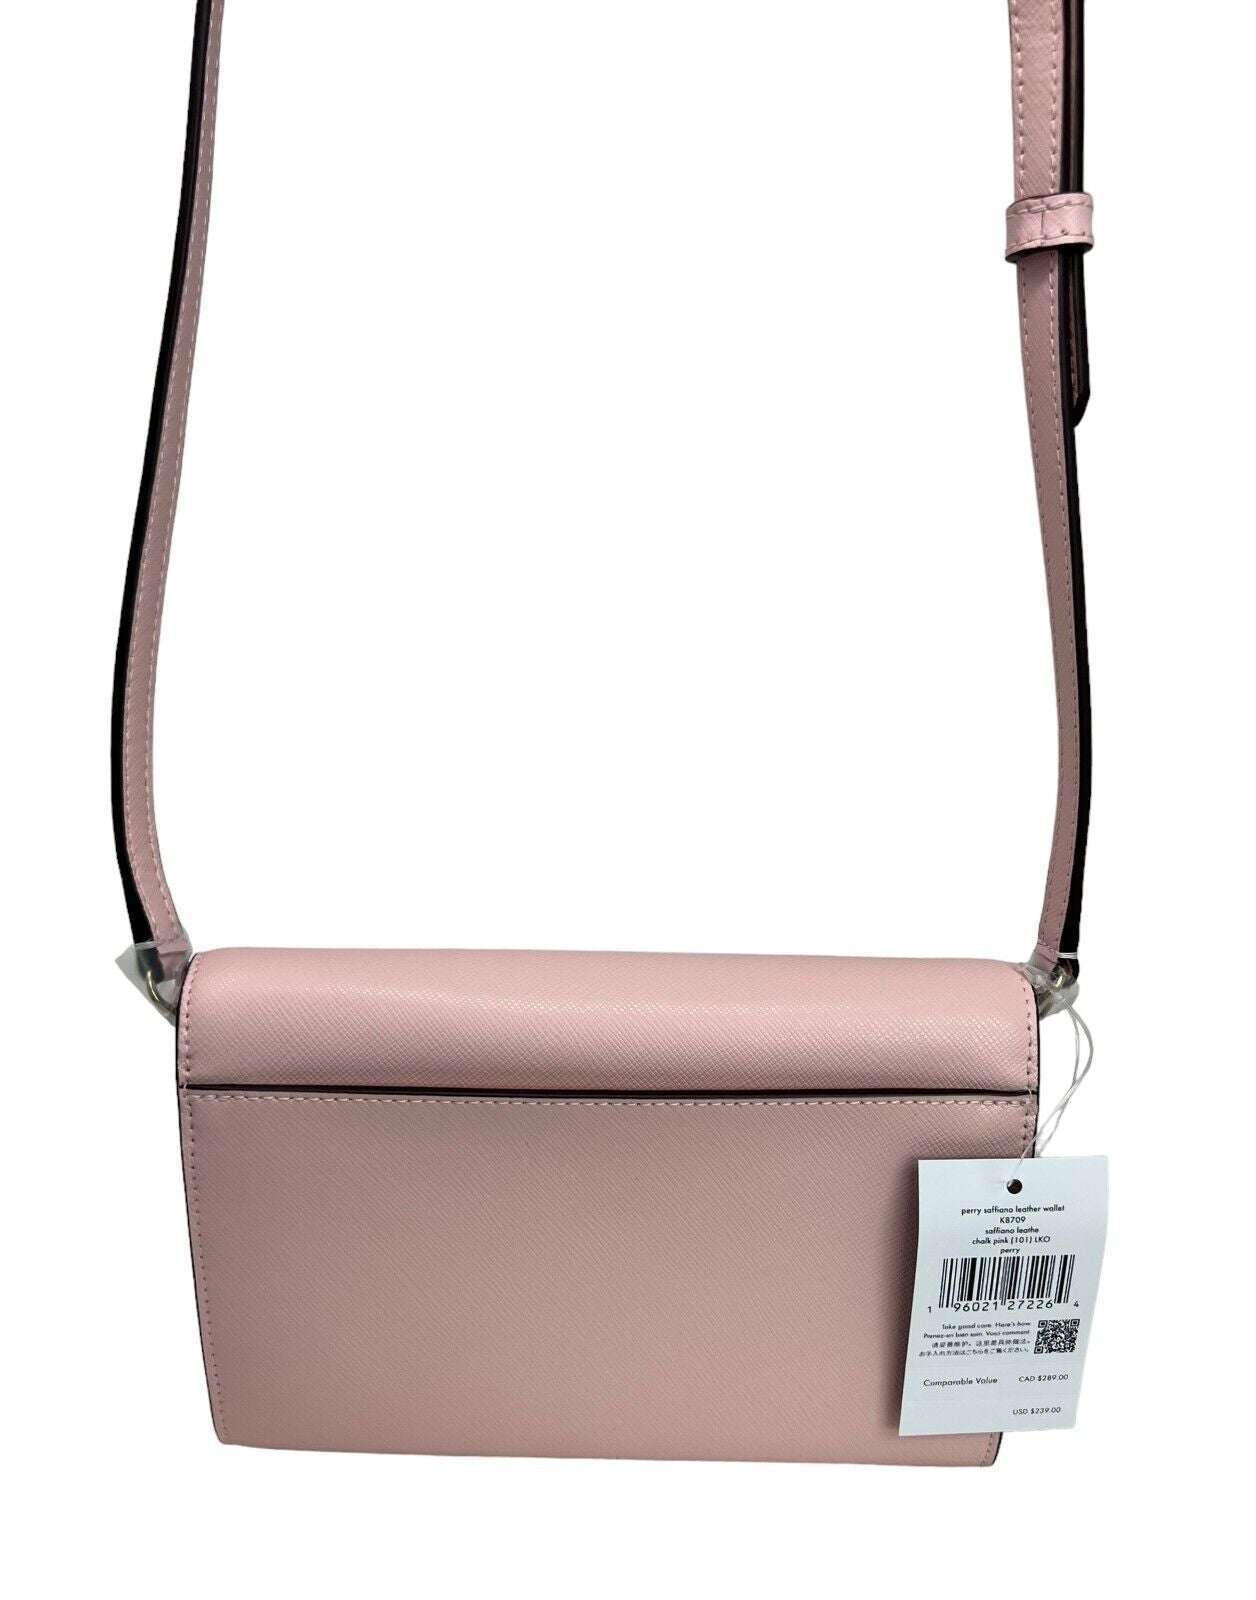 Kate Spade Perry Saffiano Leather Chalk Pink Crossbody Bag K8709 $239